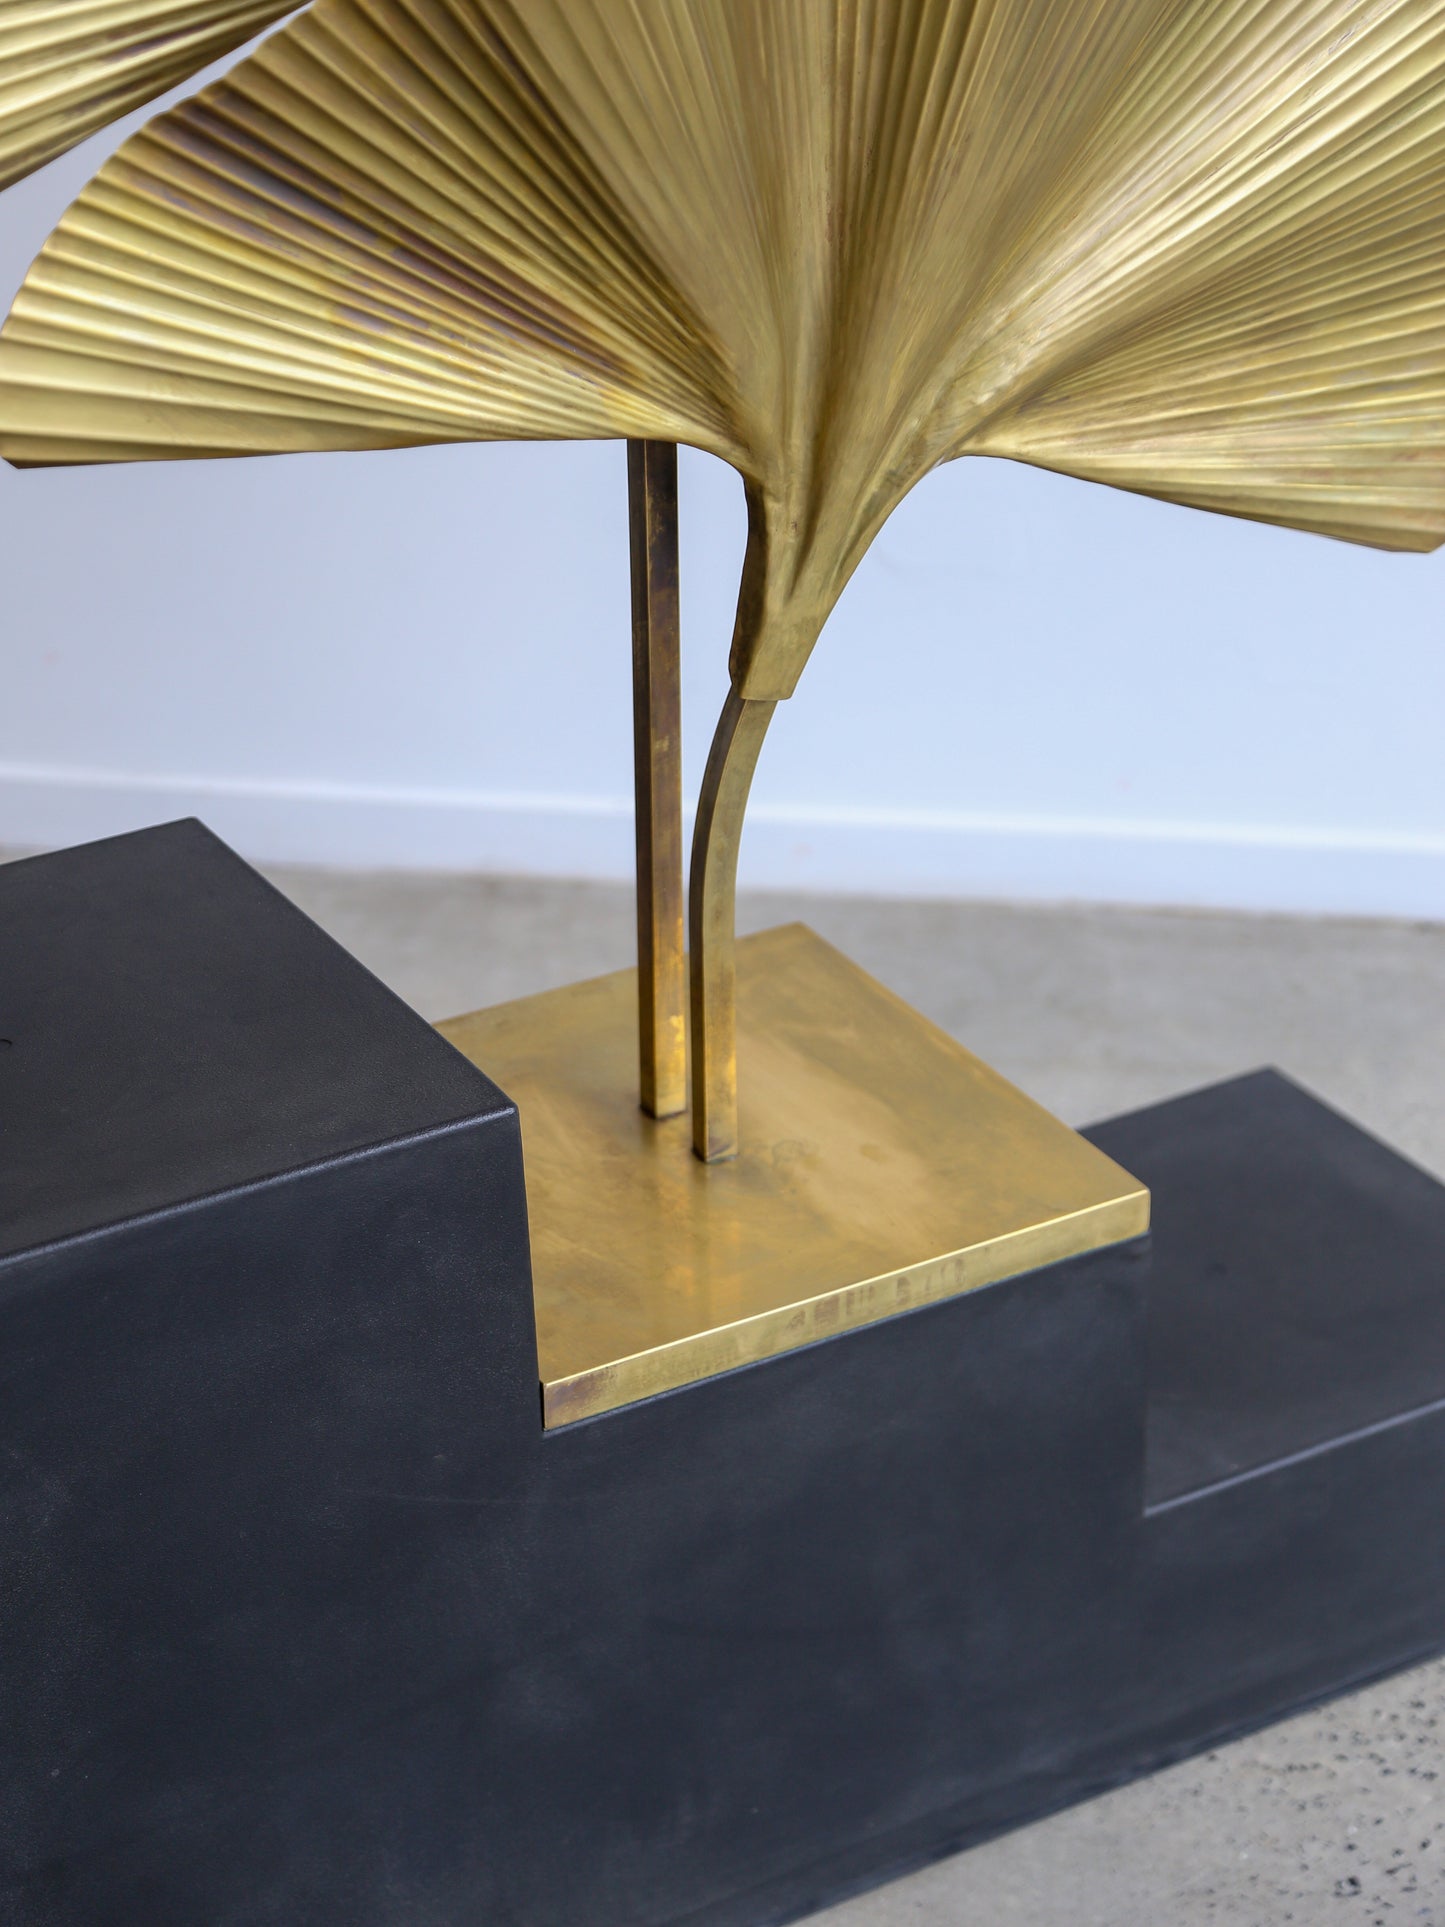 Ginko Contemporary Brass Table Lamp with Two Leaves